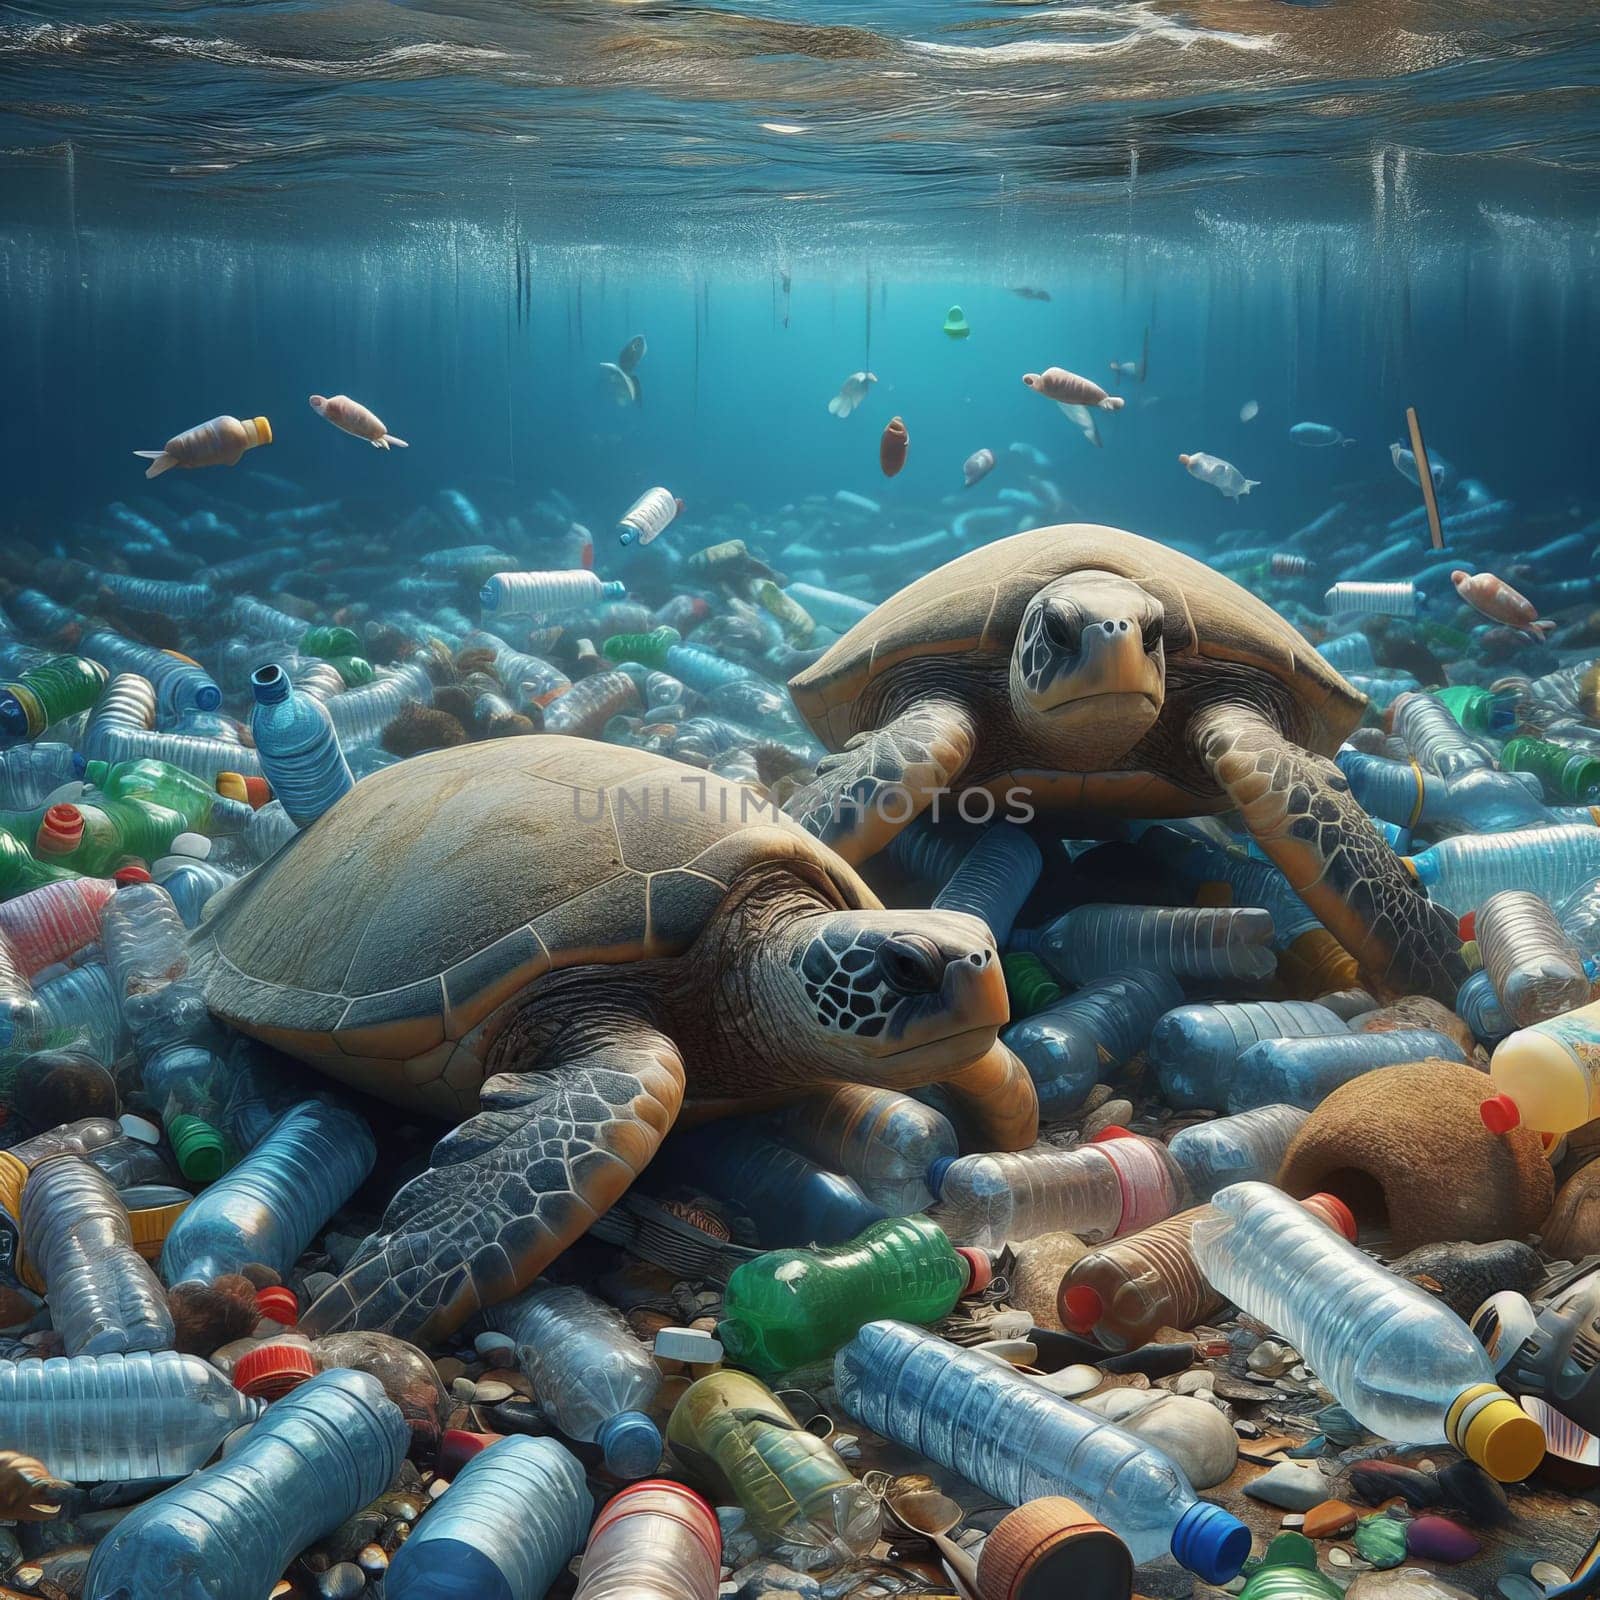 Underwater scene of turtles amidst plastic waste, highlighting the issue of environmental pollution